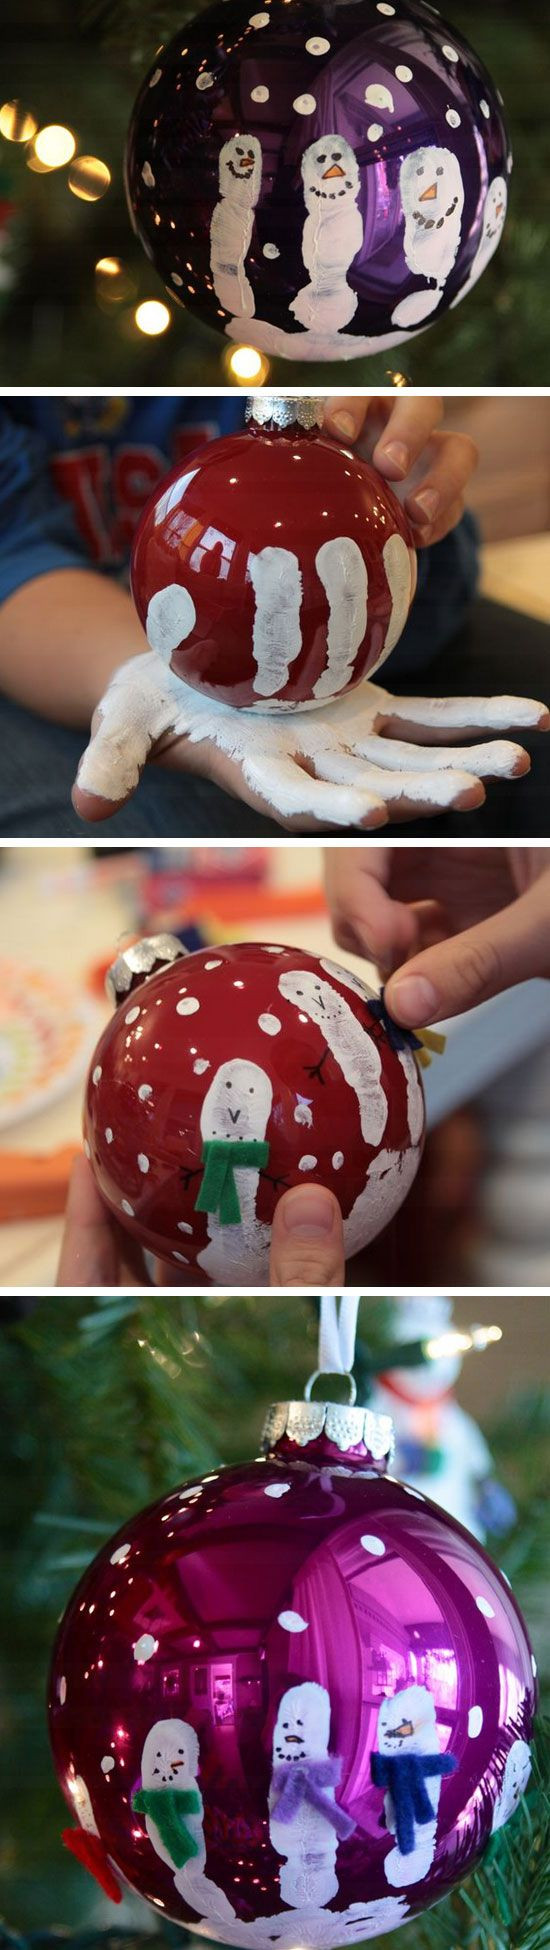 DIY Craft For Christmas
 Easy and Cute DIY Christmas Crafts for Kids to Make Hative